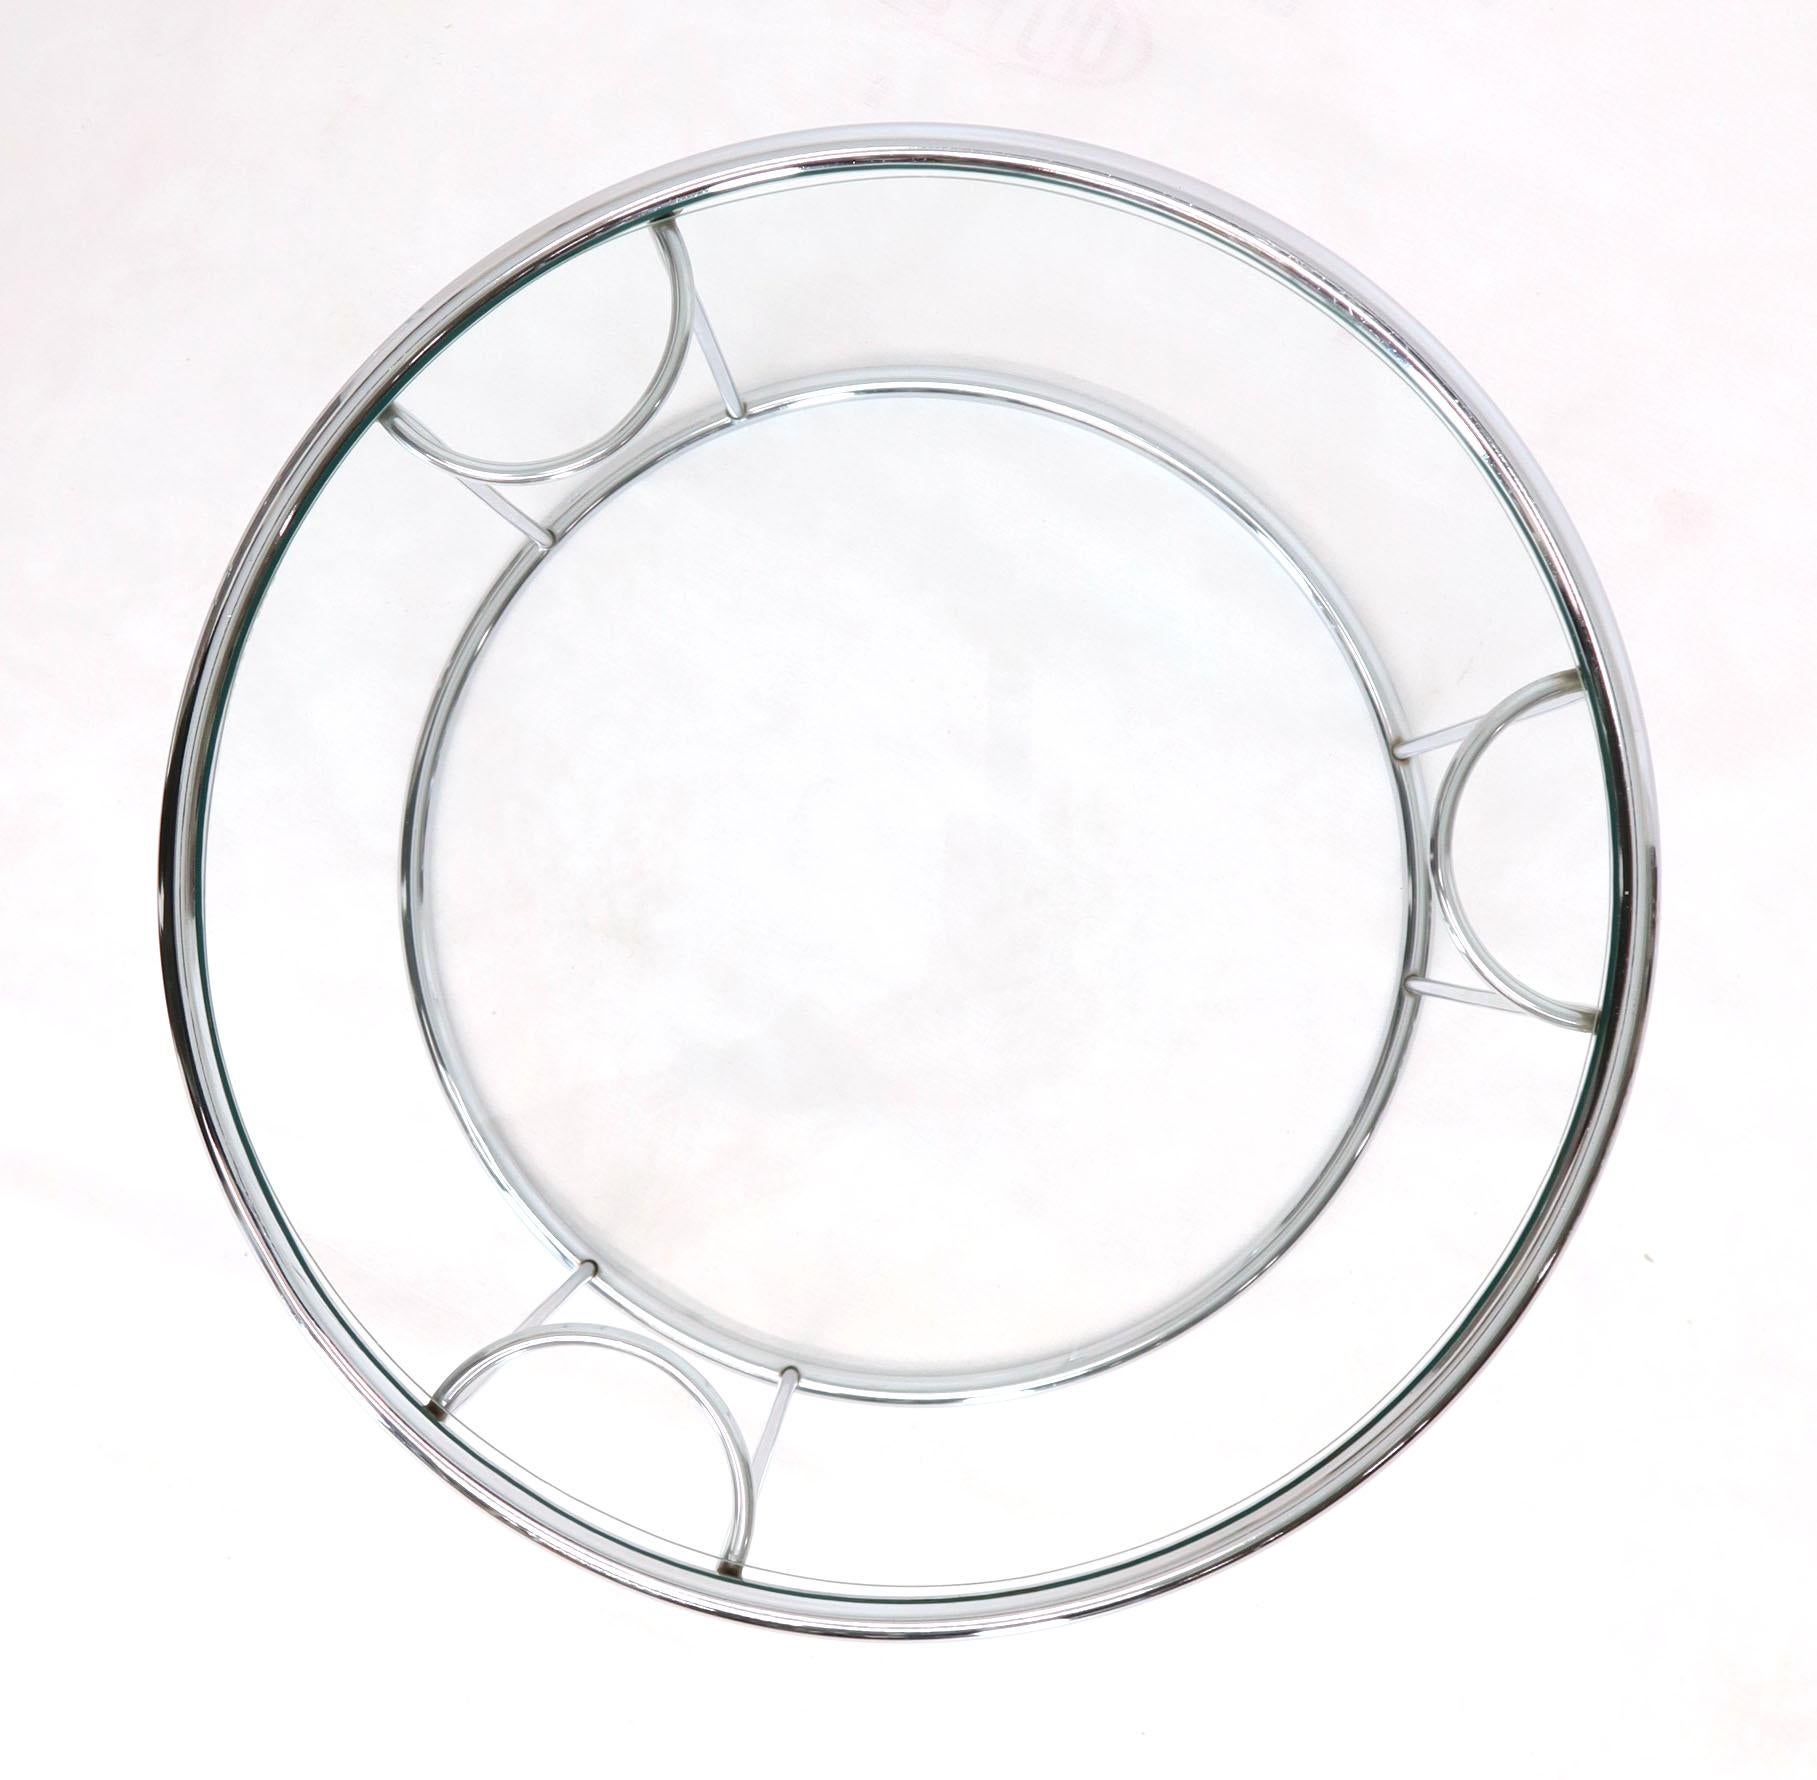 Mid-Century Modern Pair of Round Chrome and Glass Nesting Side End Table 6 Pieces Set For Sale